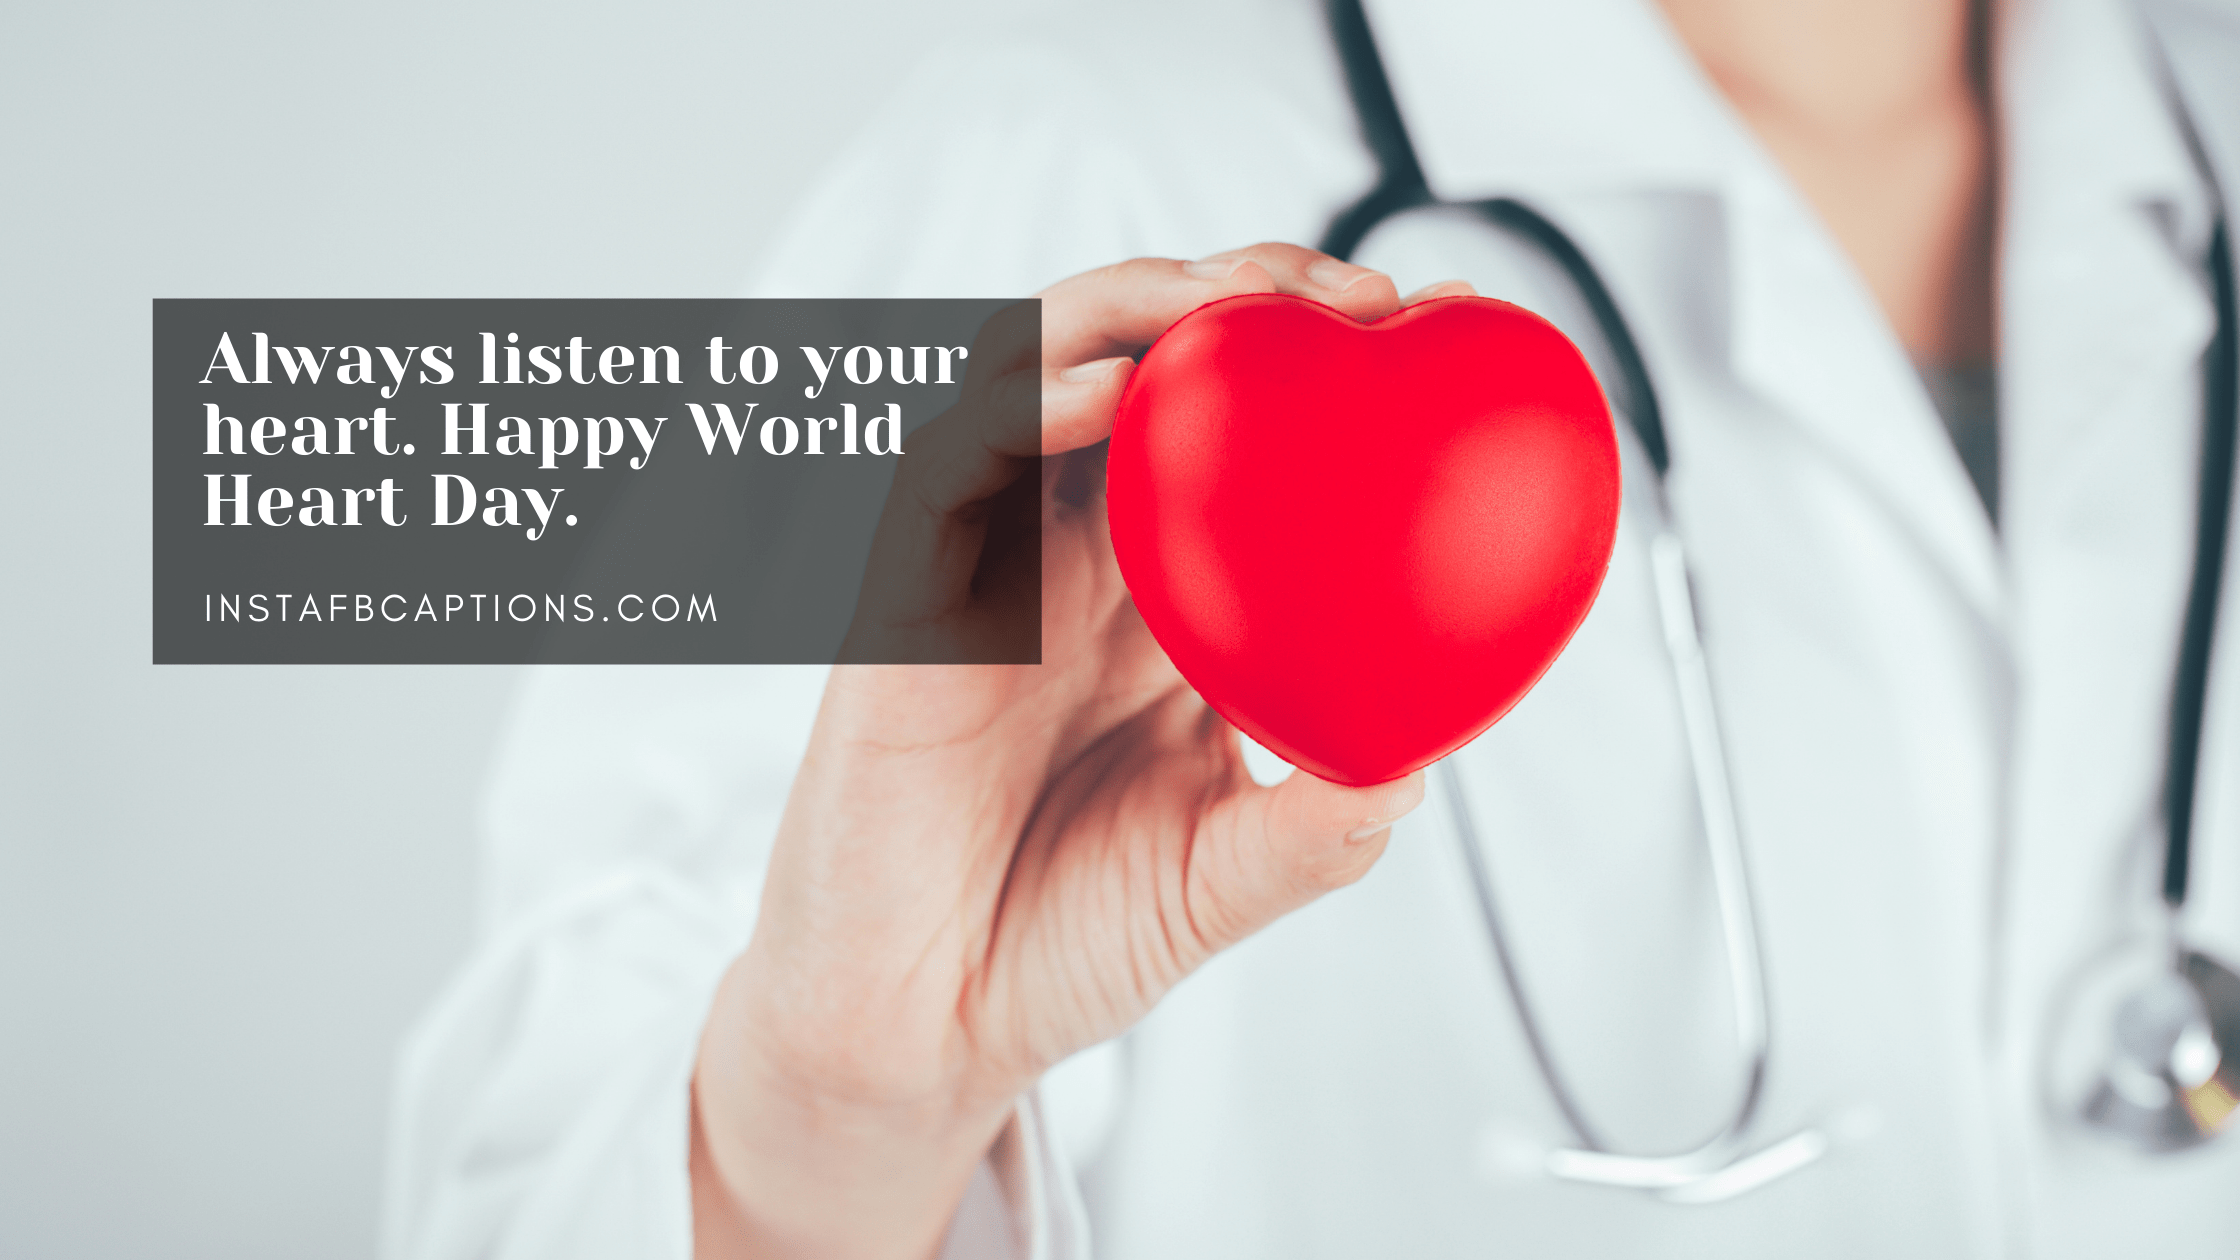 Healthy Life Healthy Messages For World Heart Day  - Healthy Life Healthy Messages for World Heart Day - 99 World Heart Day Captions, Quotes, Wishes in 2023